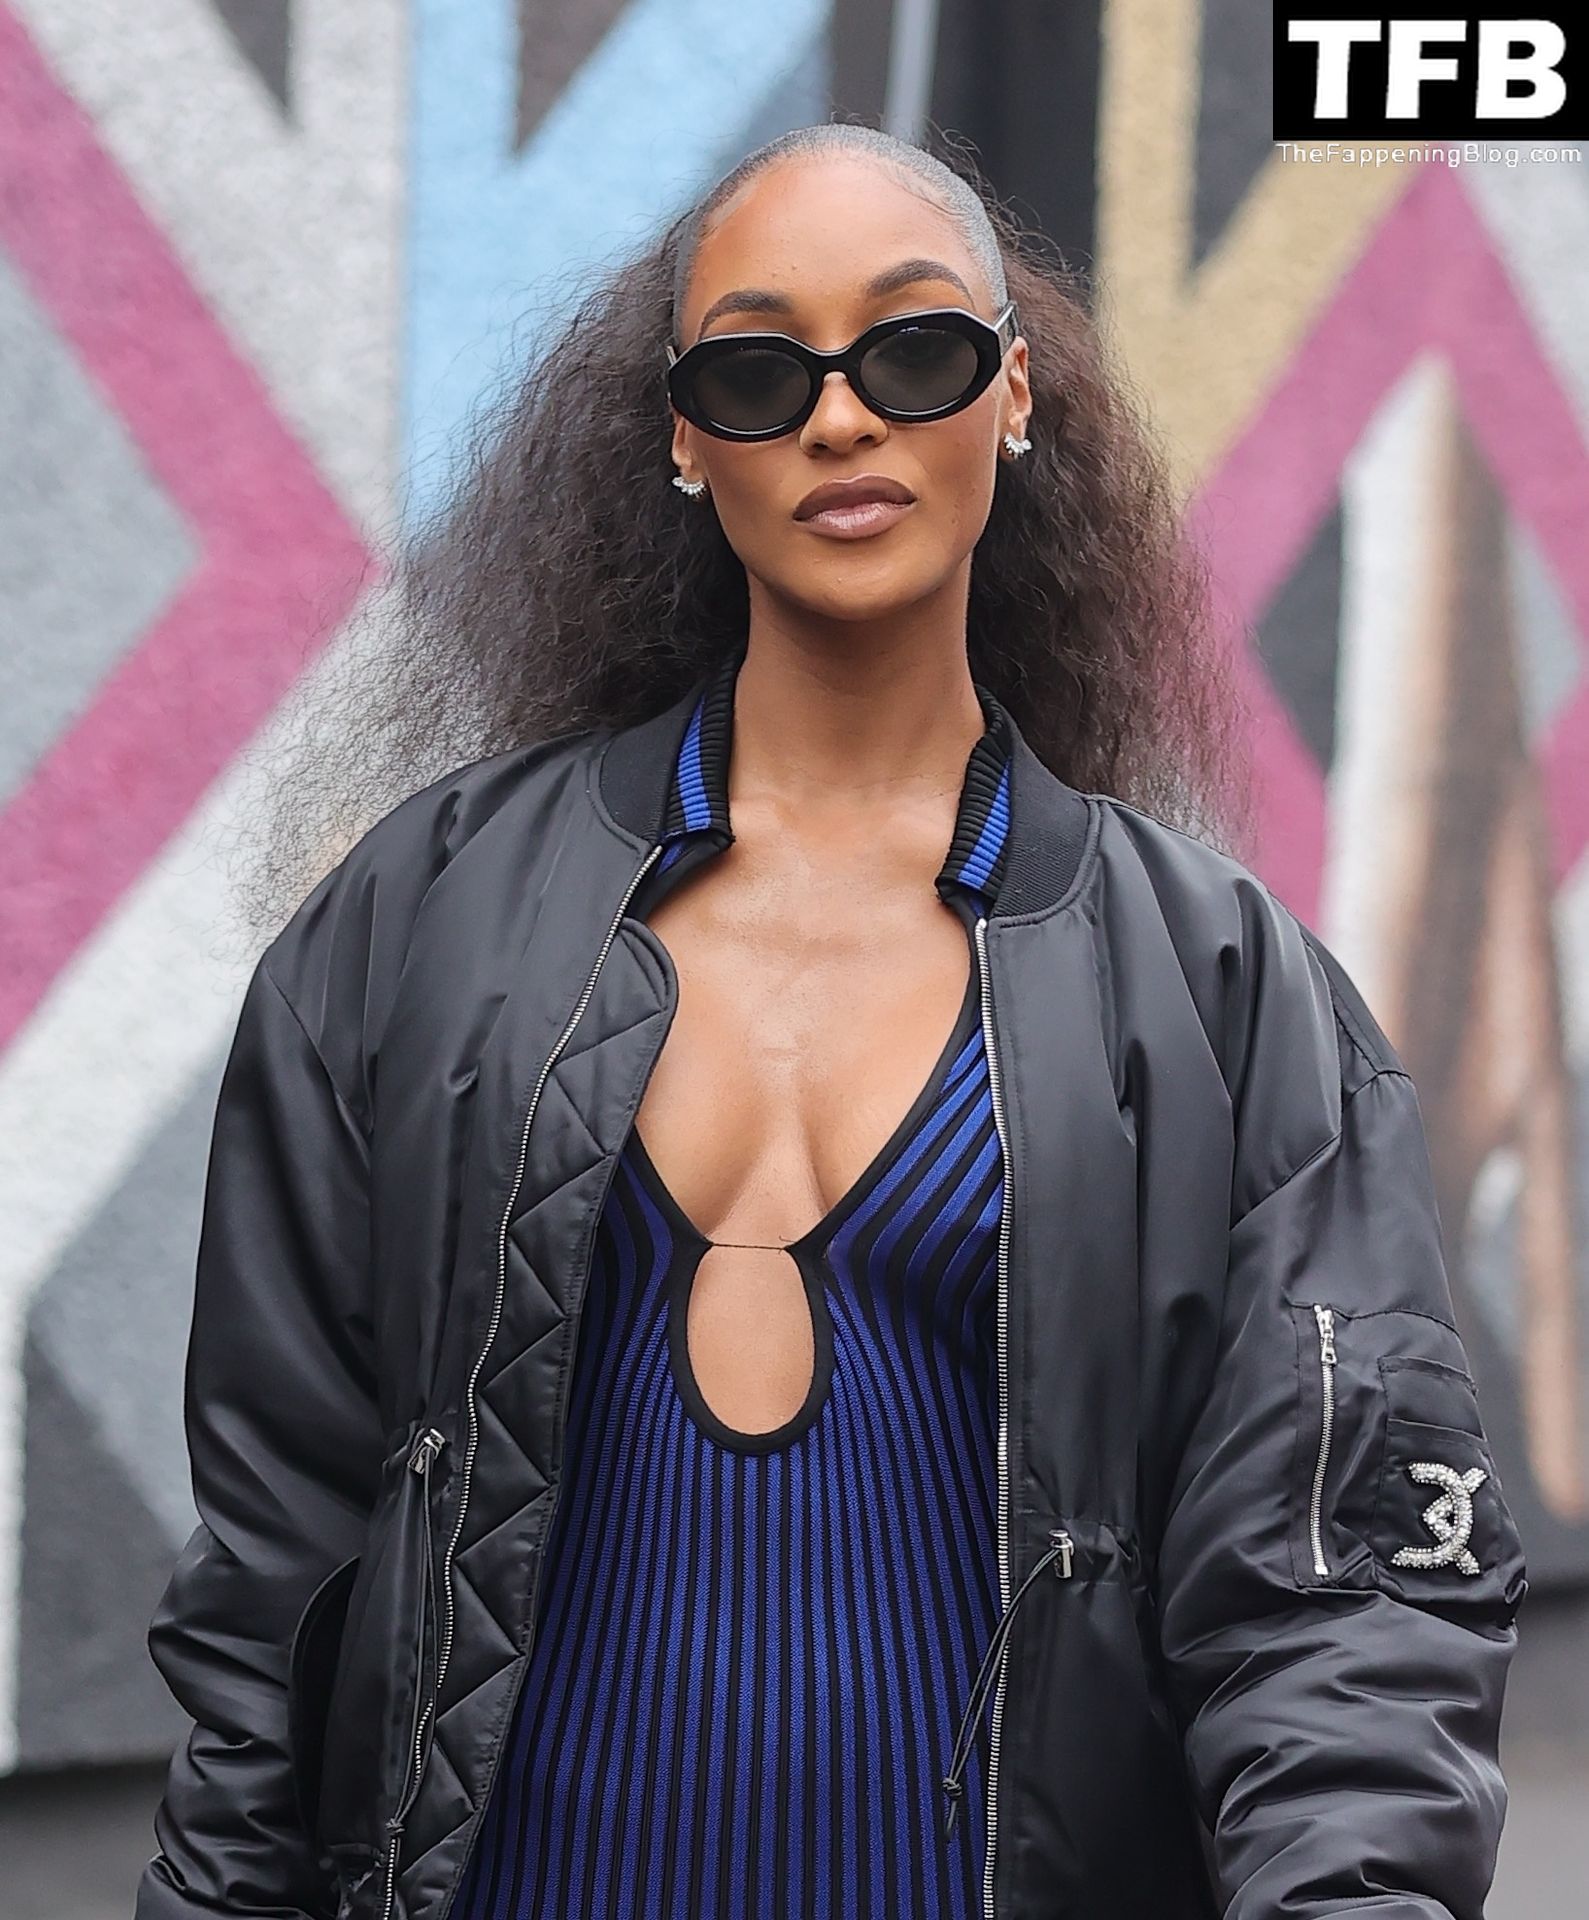 Jourdan Dunn Sexy The Fappening Blog 1 - Jourdan Dunn Shows Off Her Sexy Legs and Tits at David Koma Fashion Show (5 Photos)